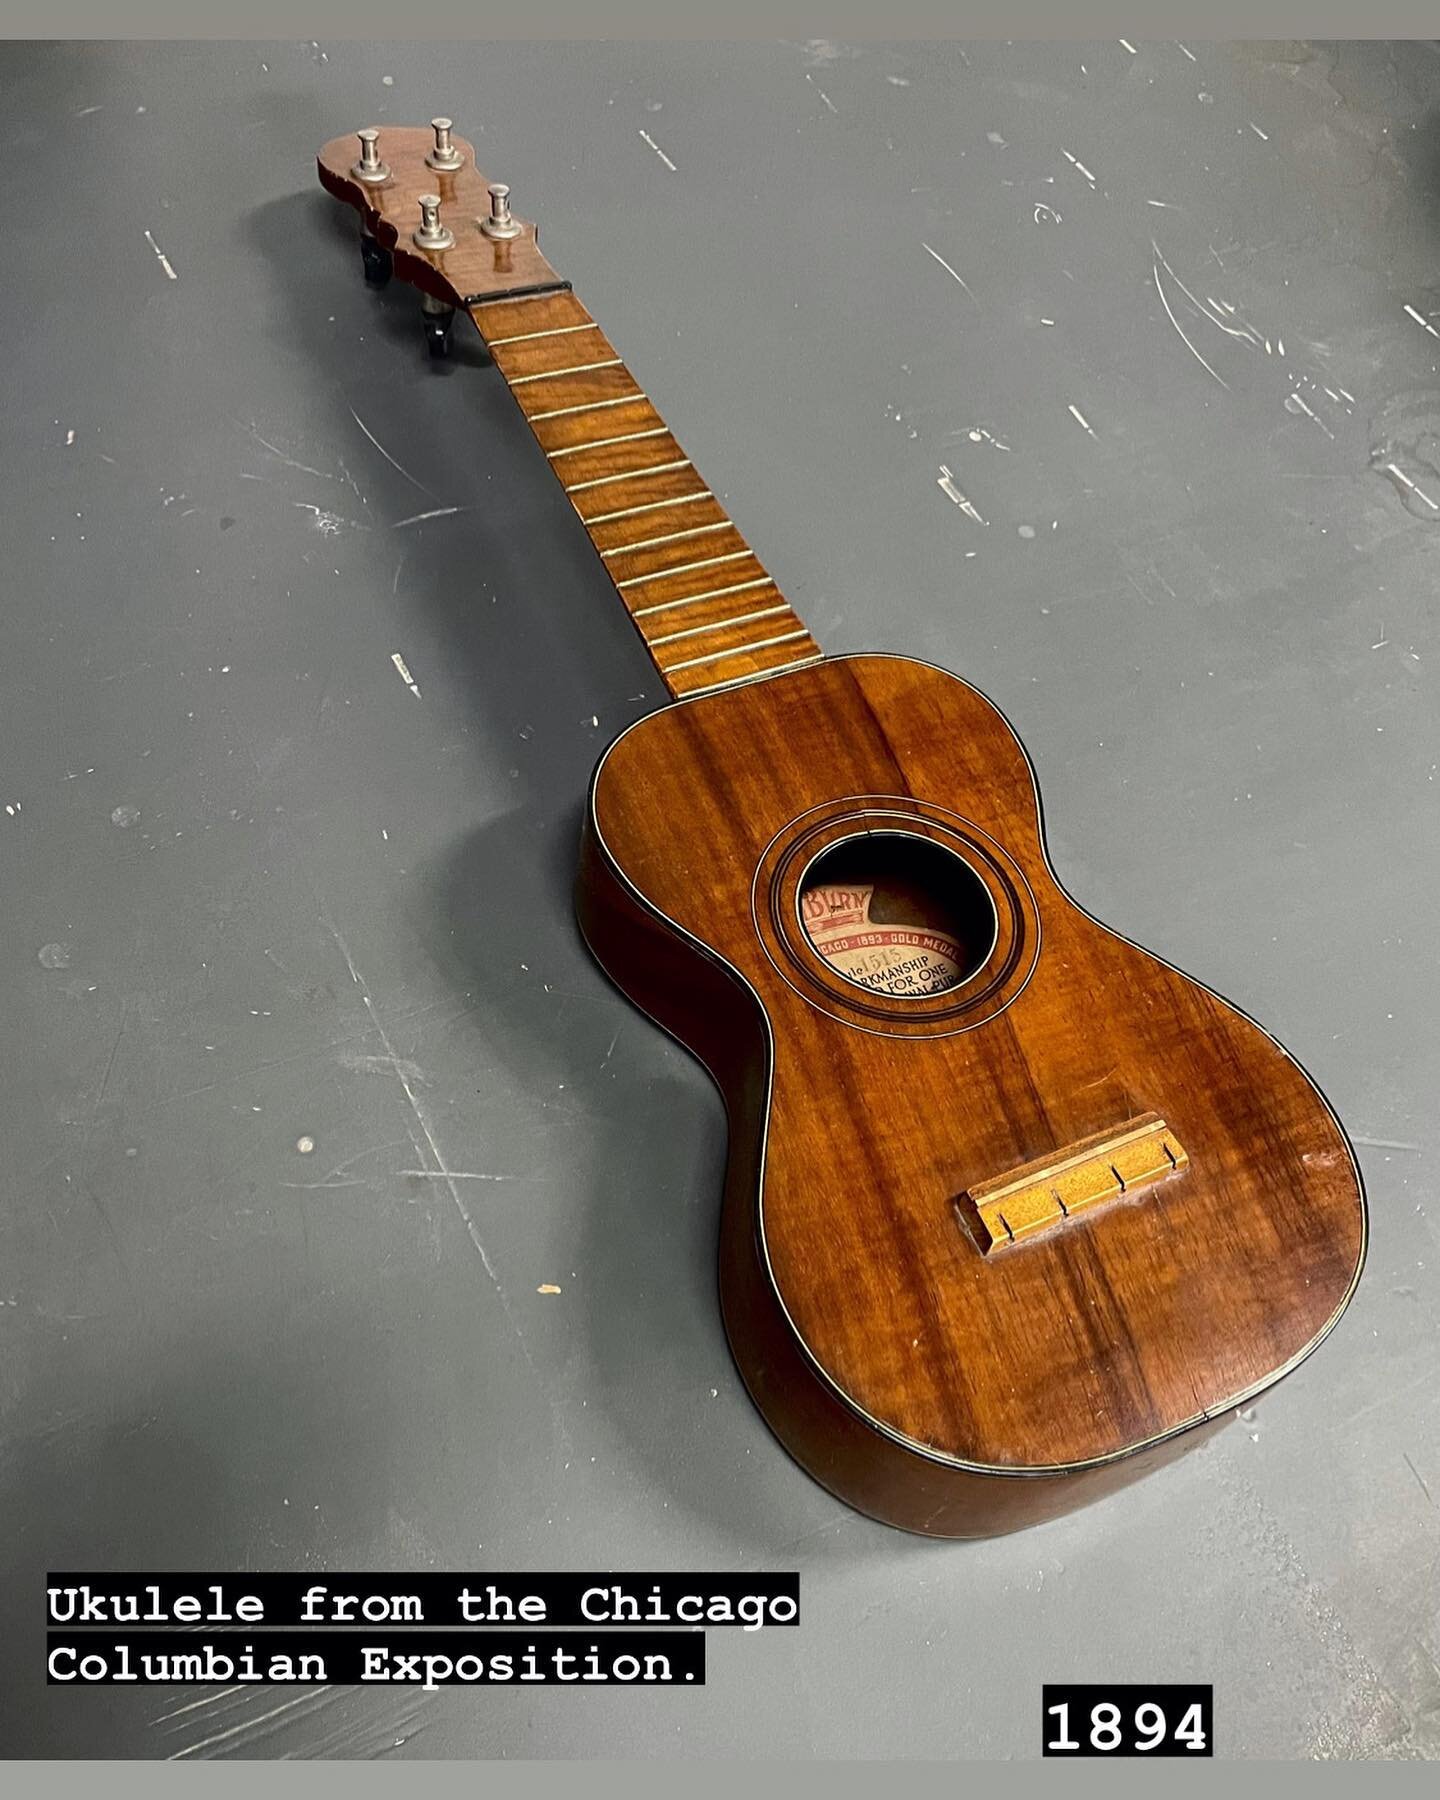 Here is a Washburn ukulele that was purchased at the Chicago Columbian Exposition in 1893. (It&rsquo;s an 1894 model). We&rsquo;ve done a bunch of work to condition and repair the dry and cracking wood. The neck was loose and the bridge was about to 